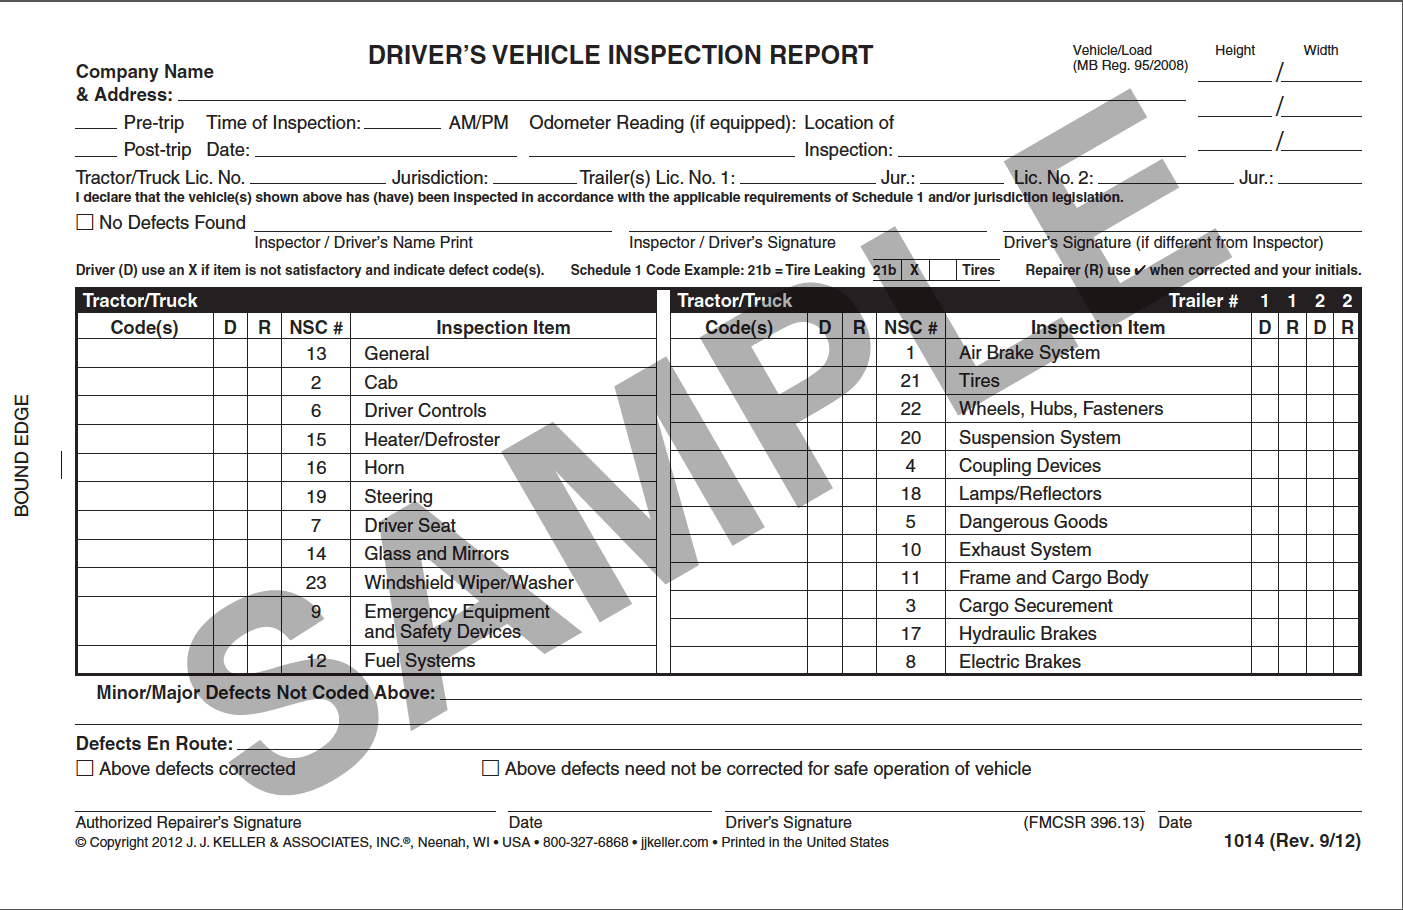 Vehicle Inspection Reports - English - ICC Canada